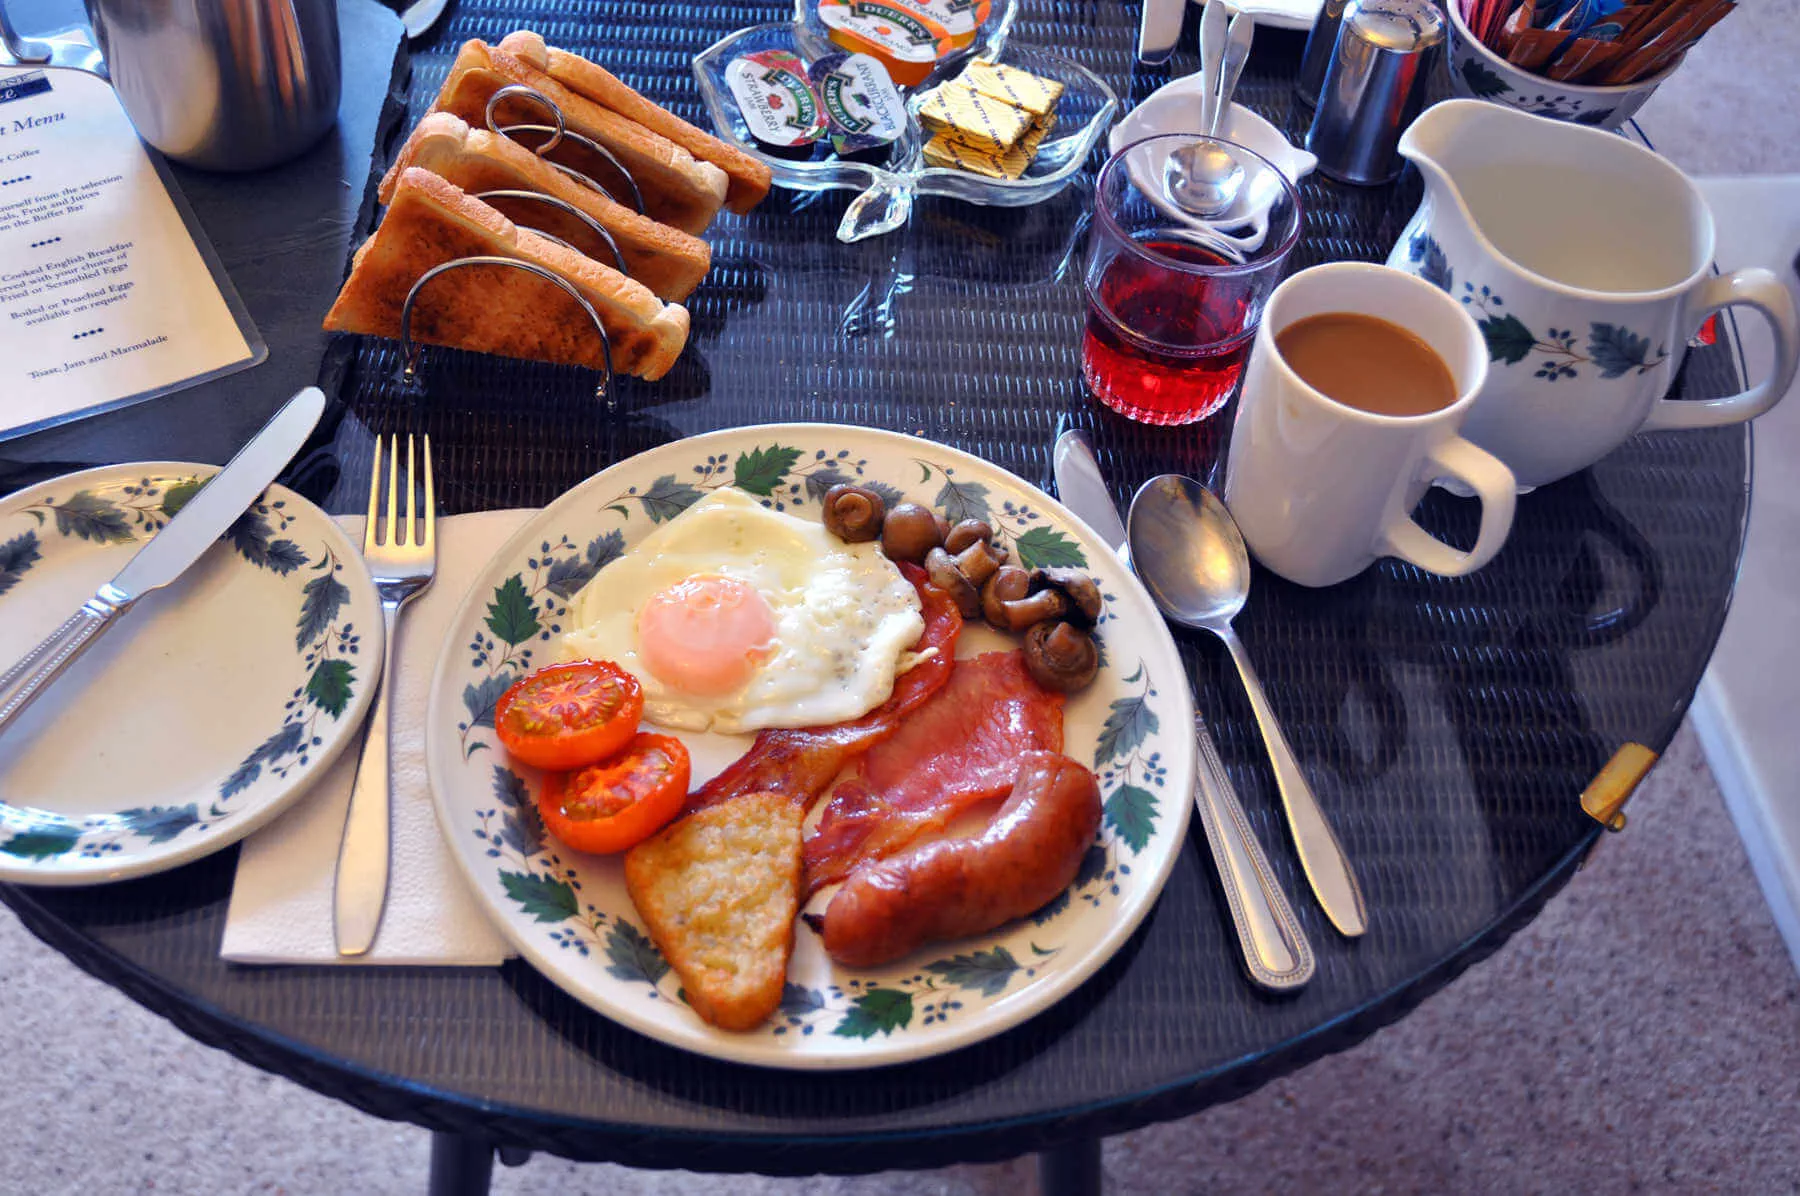 Wherever you travel in the British Isles, you'll find a version of the stick-to-your ribs breakfast fry